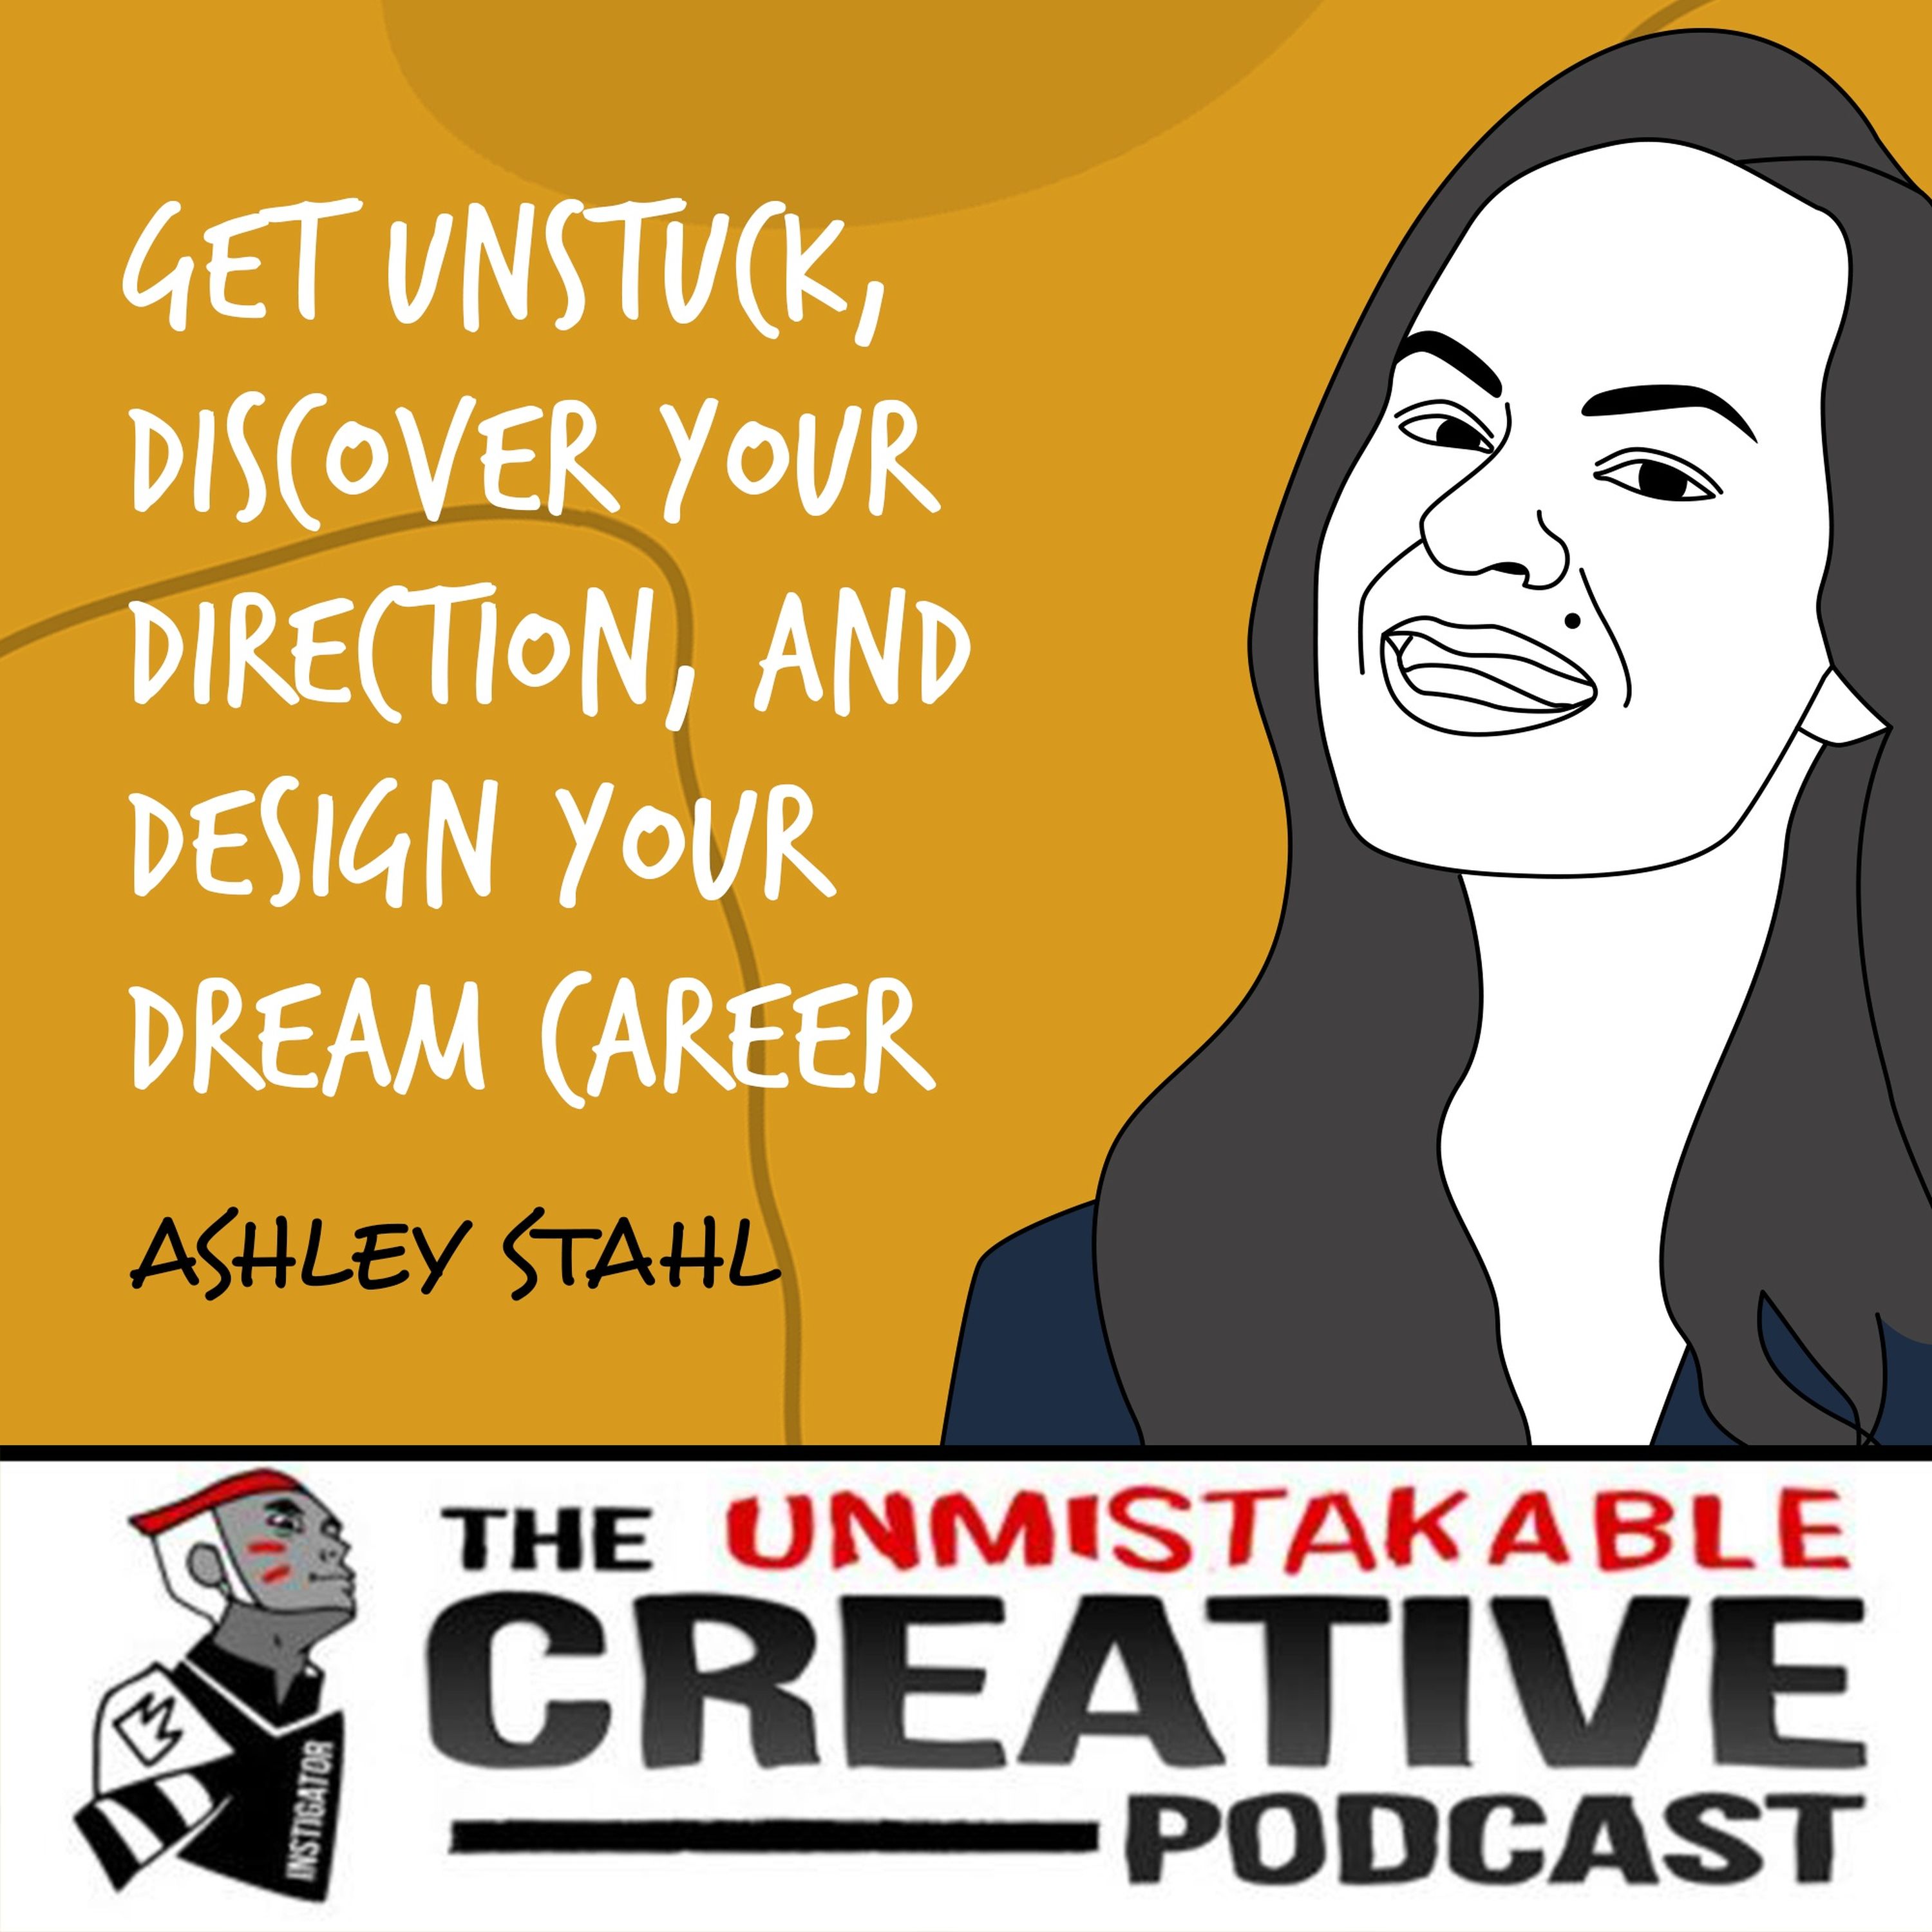 Ashley Stahl - Part 1 | Get Unstuck, Discover Your Direction, and Design Your Dream Career Image